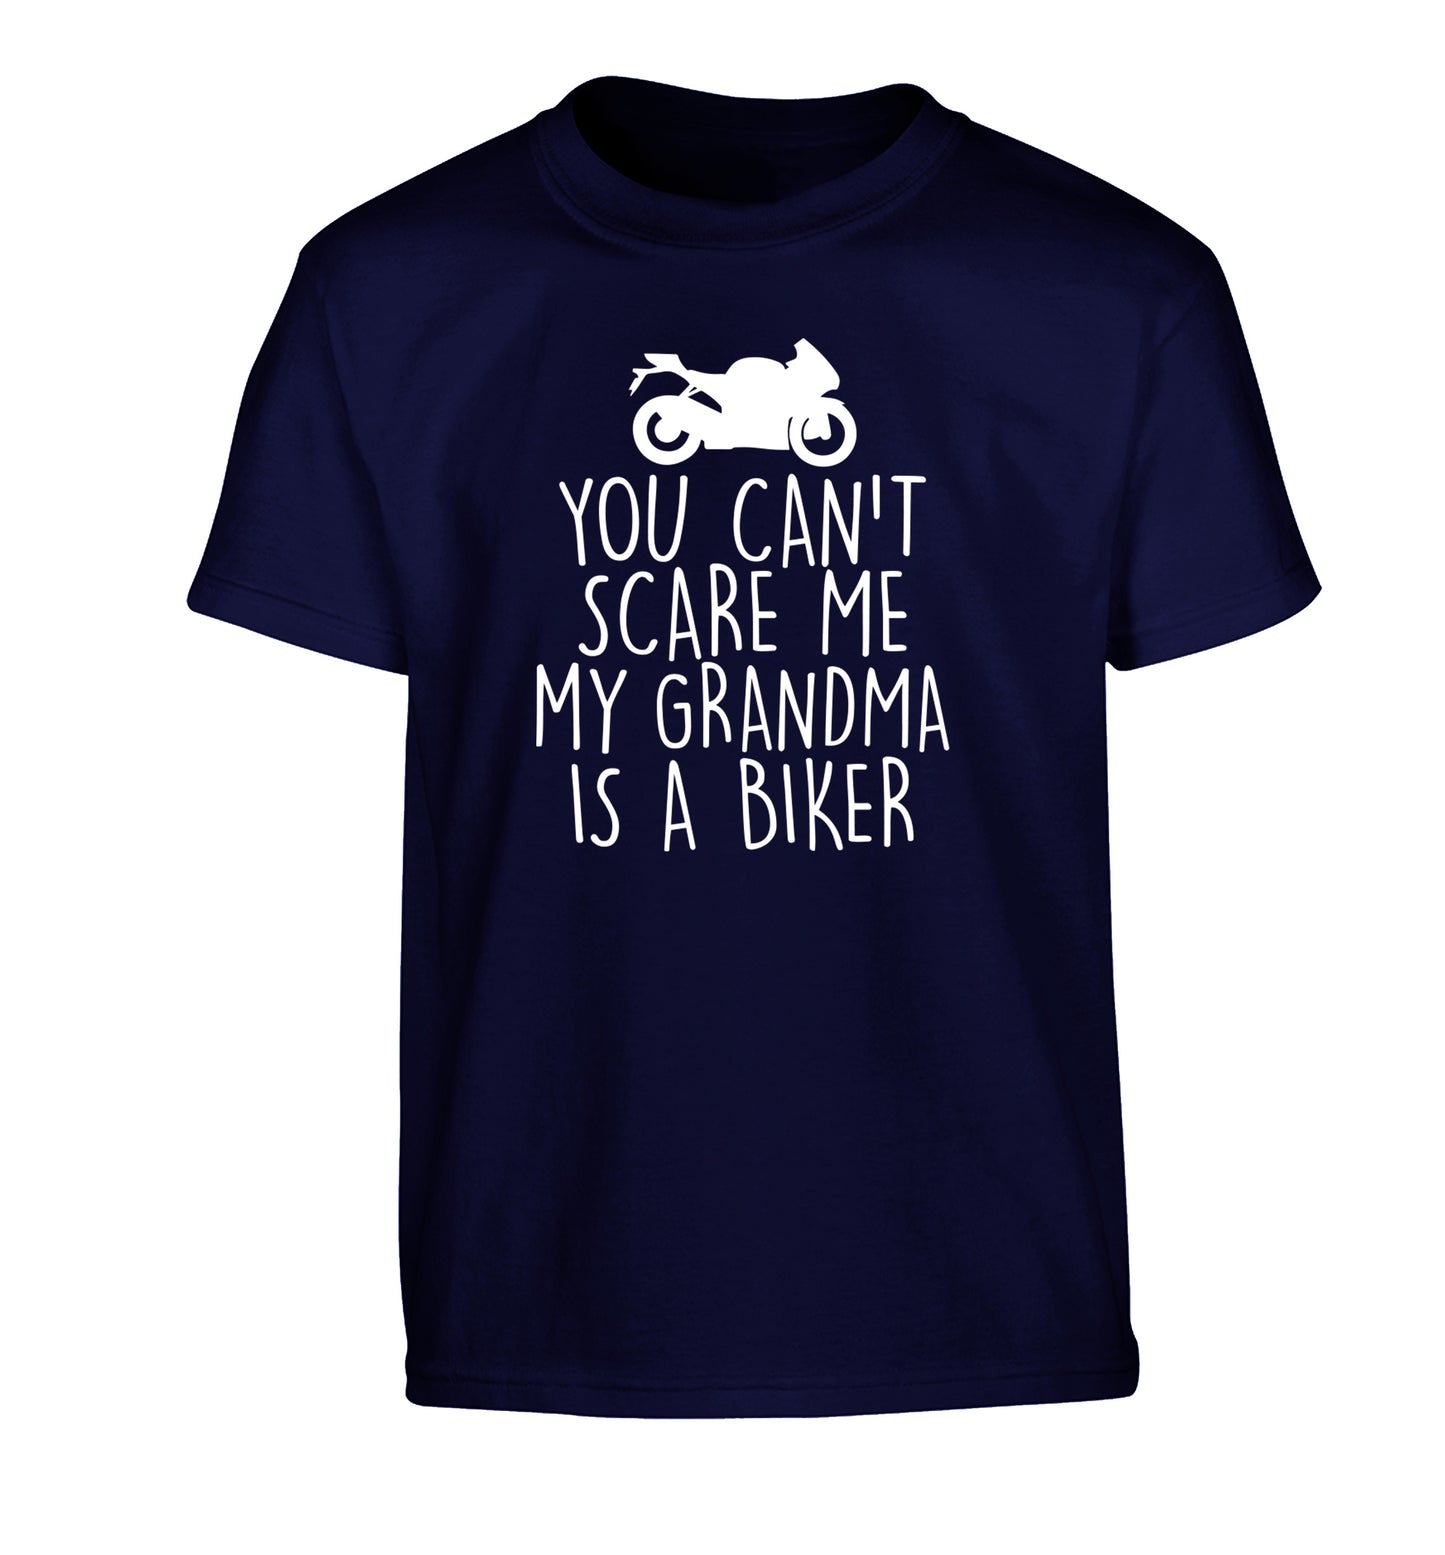 You can't scare me my grandma is a biker Children's navy Tshirt 12-13 Years